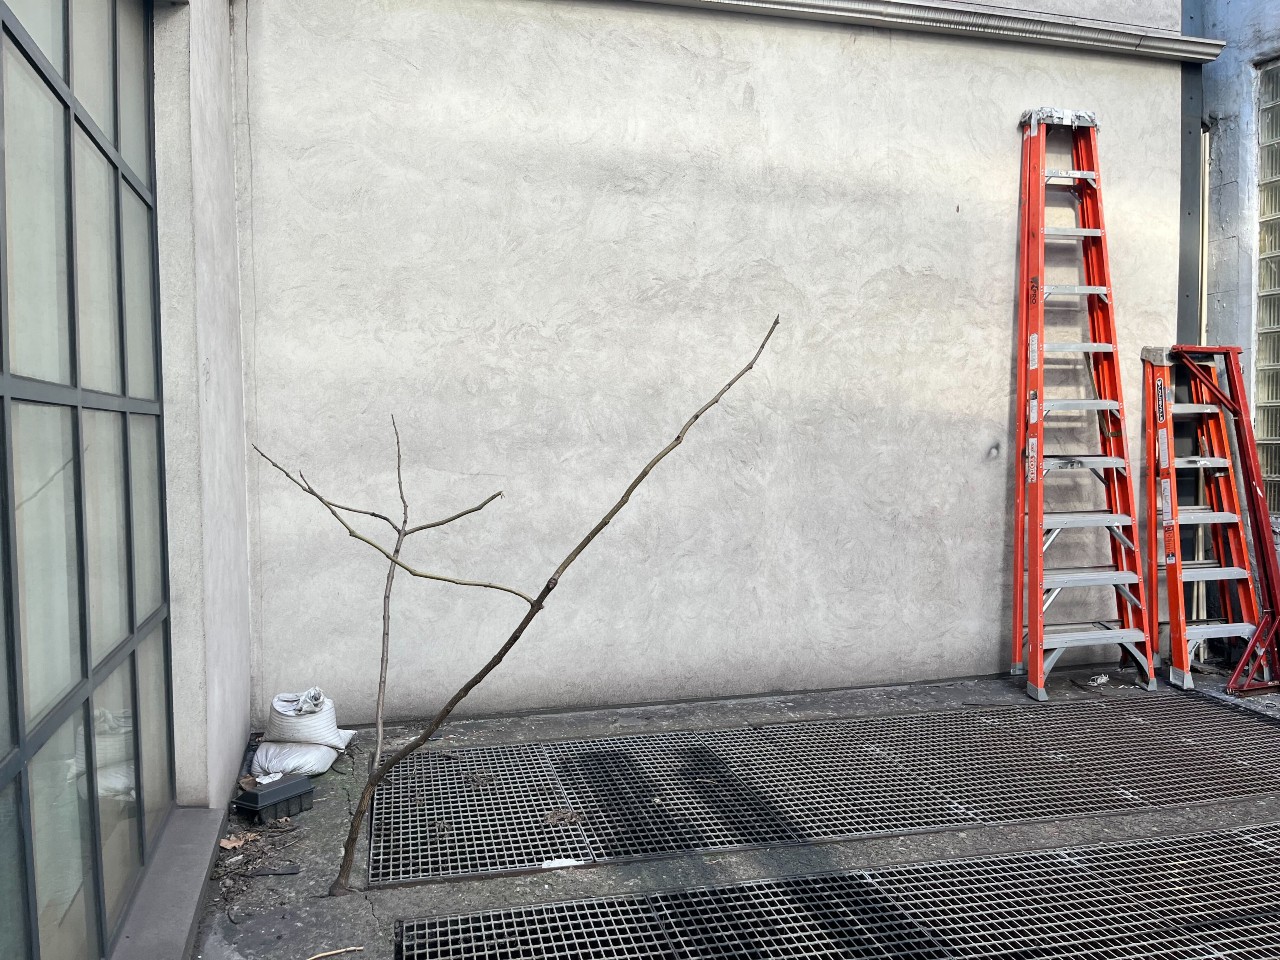 A dead tree emerges out of a grate, against a gray wall and red stepladders.